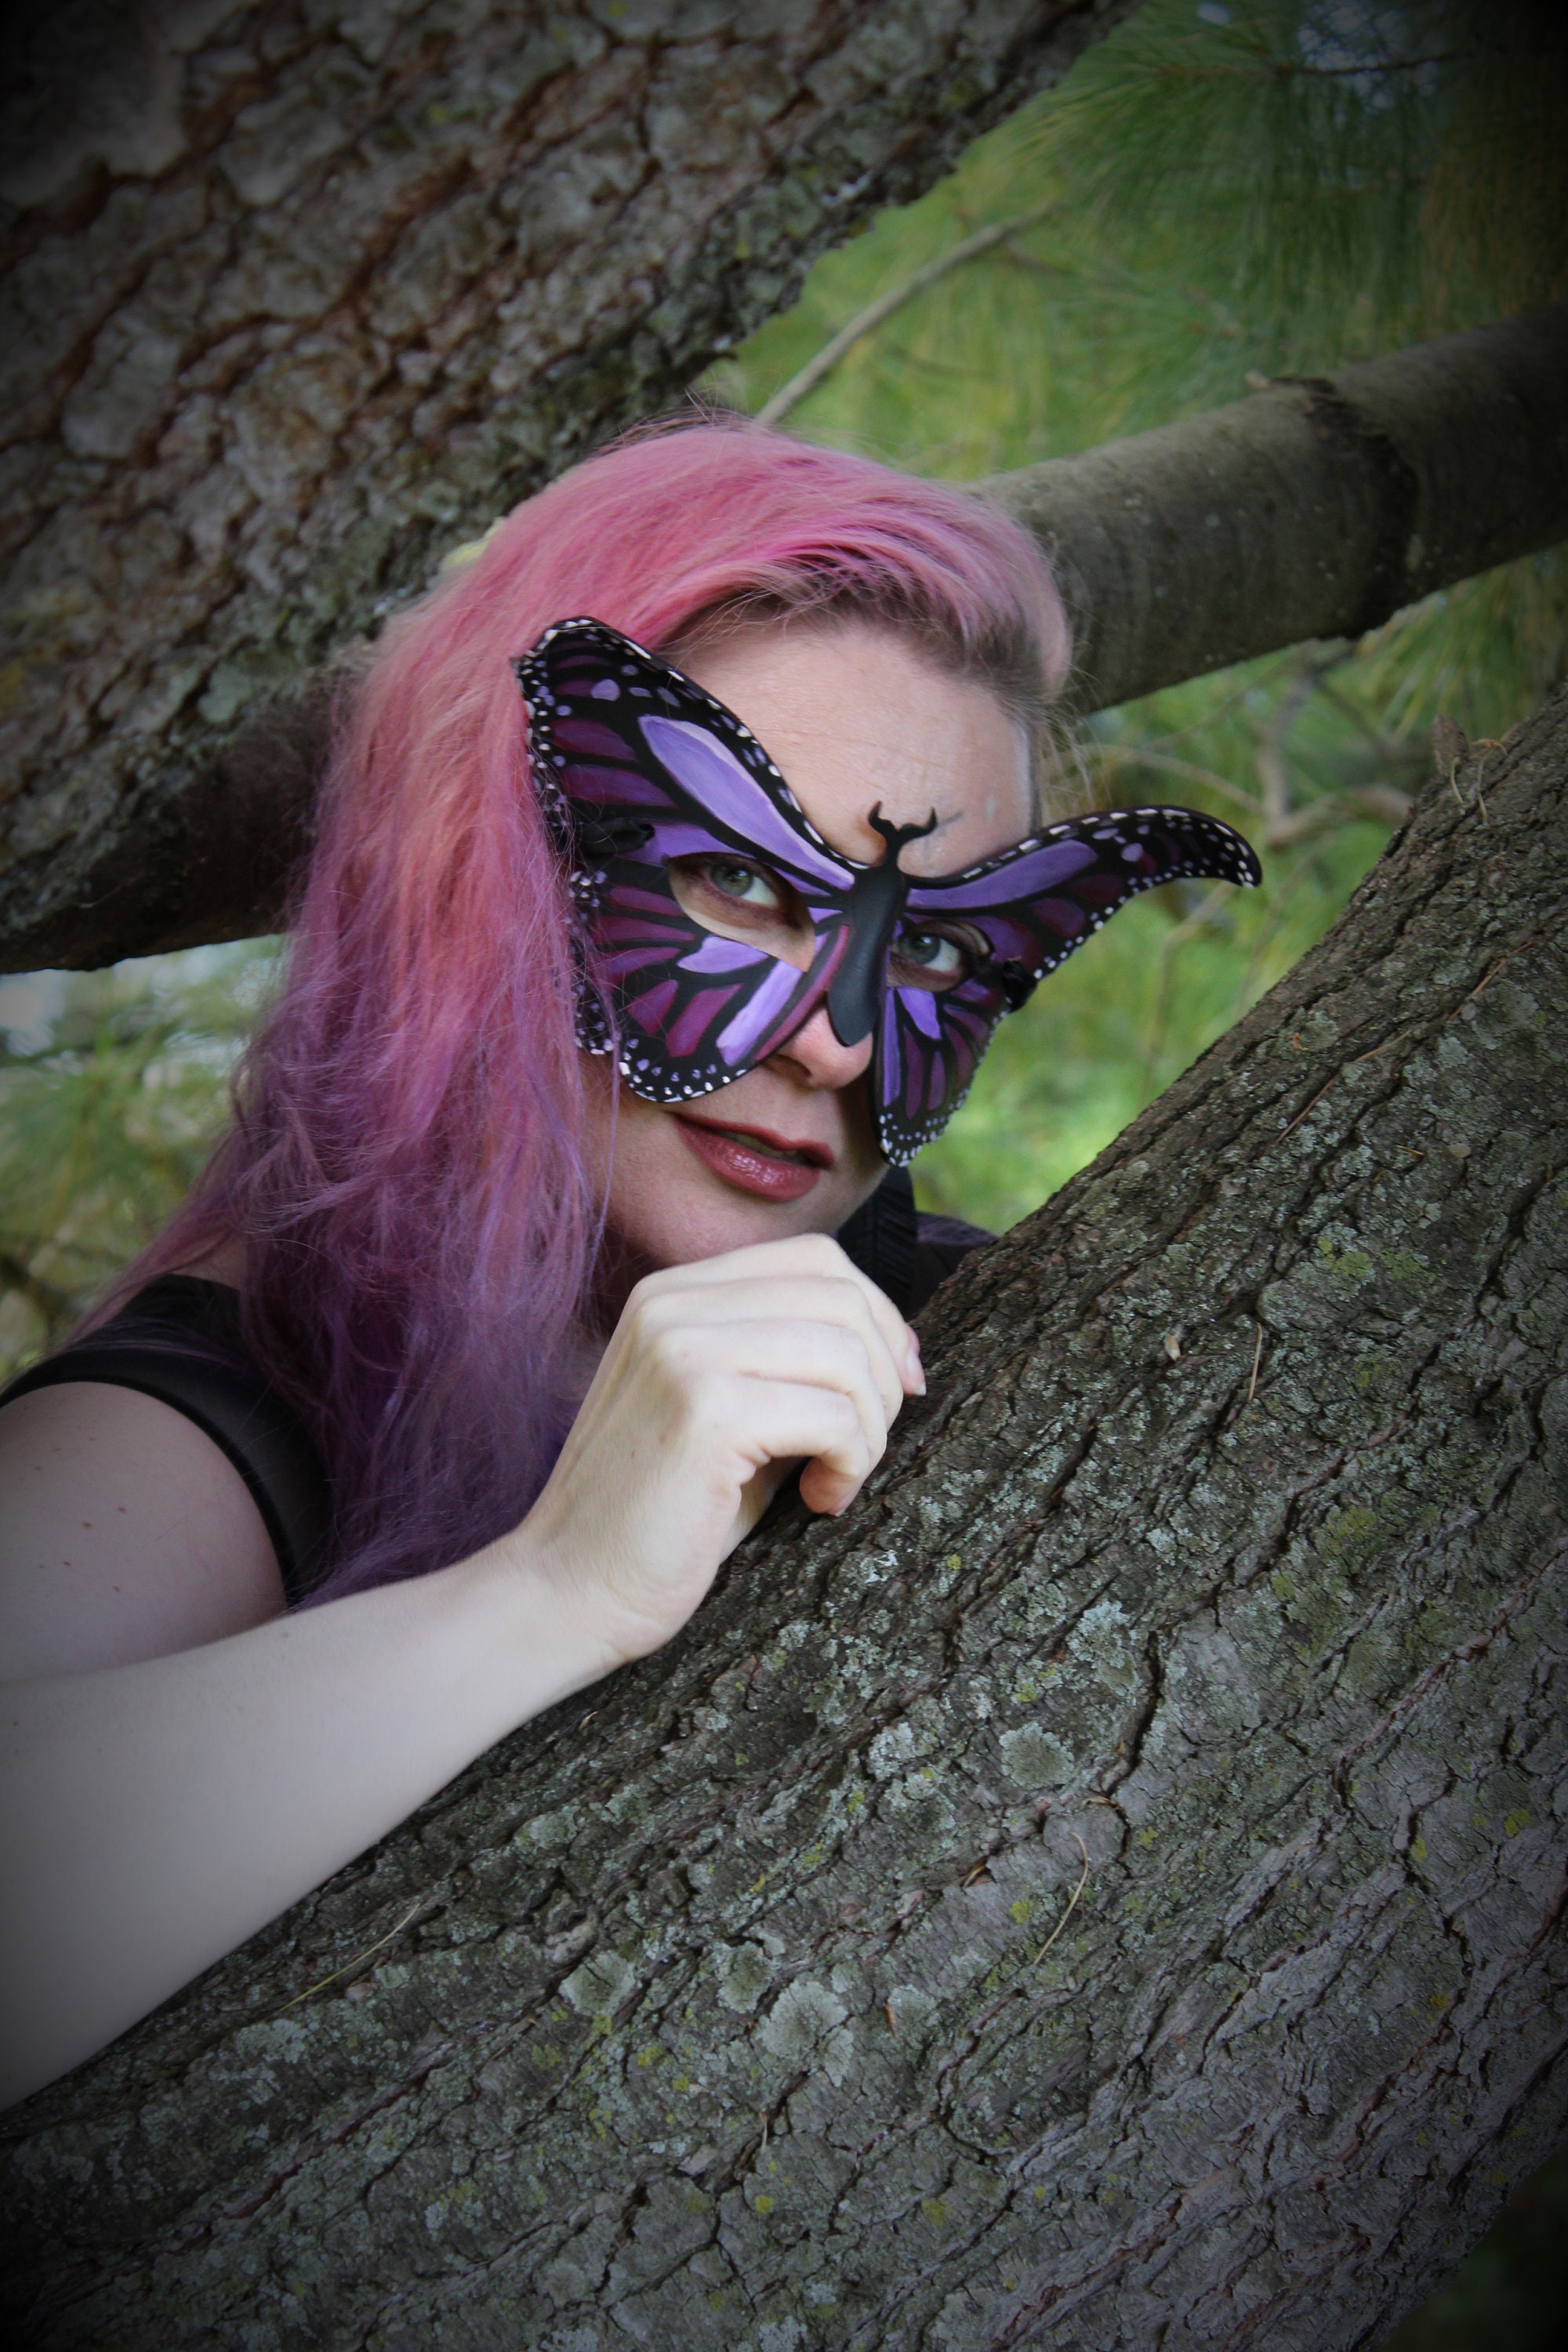 Purple and Blue Monarch Butterfly Masquerade Mask with feather